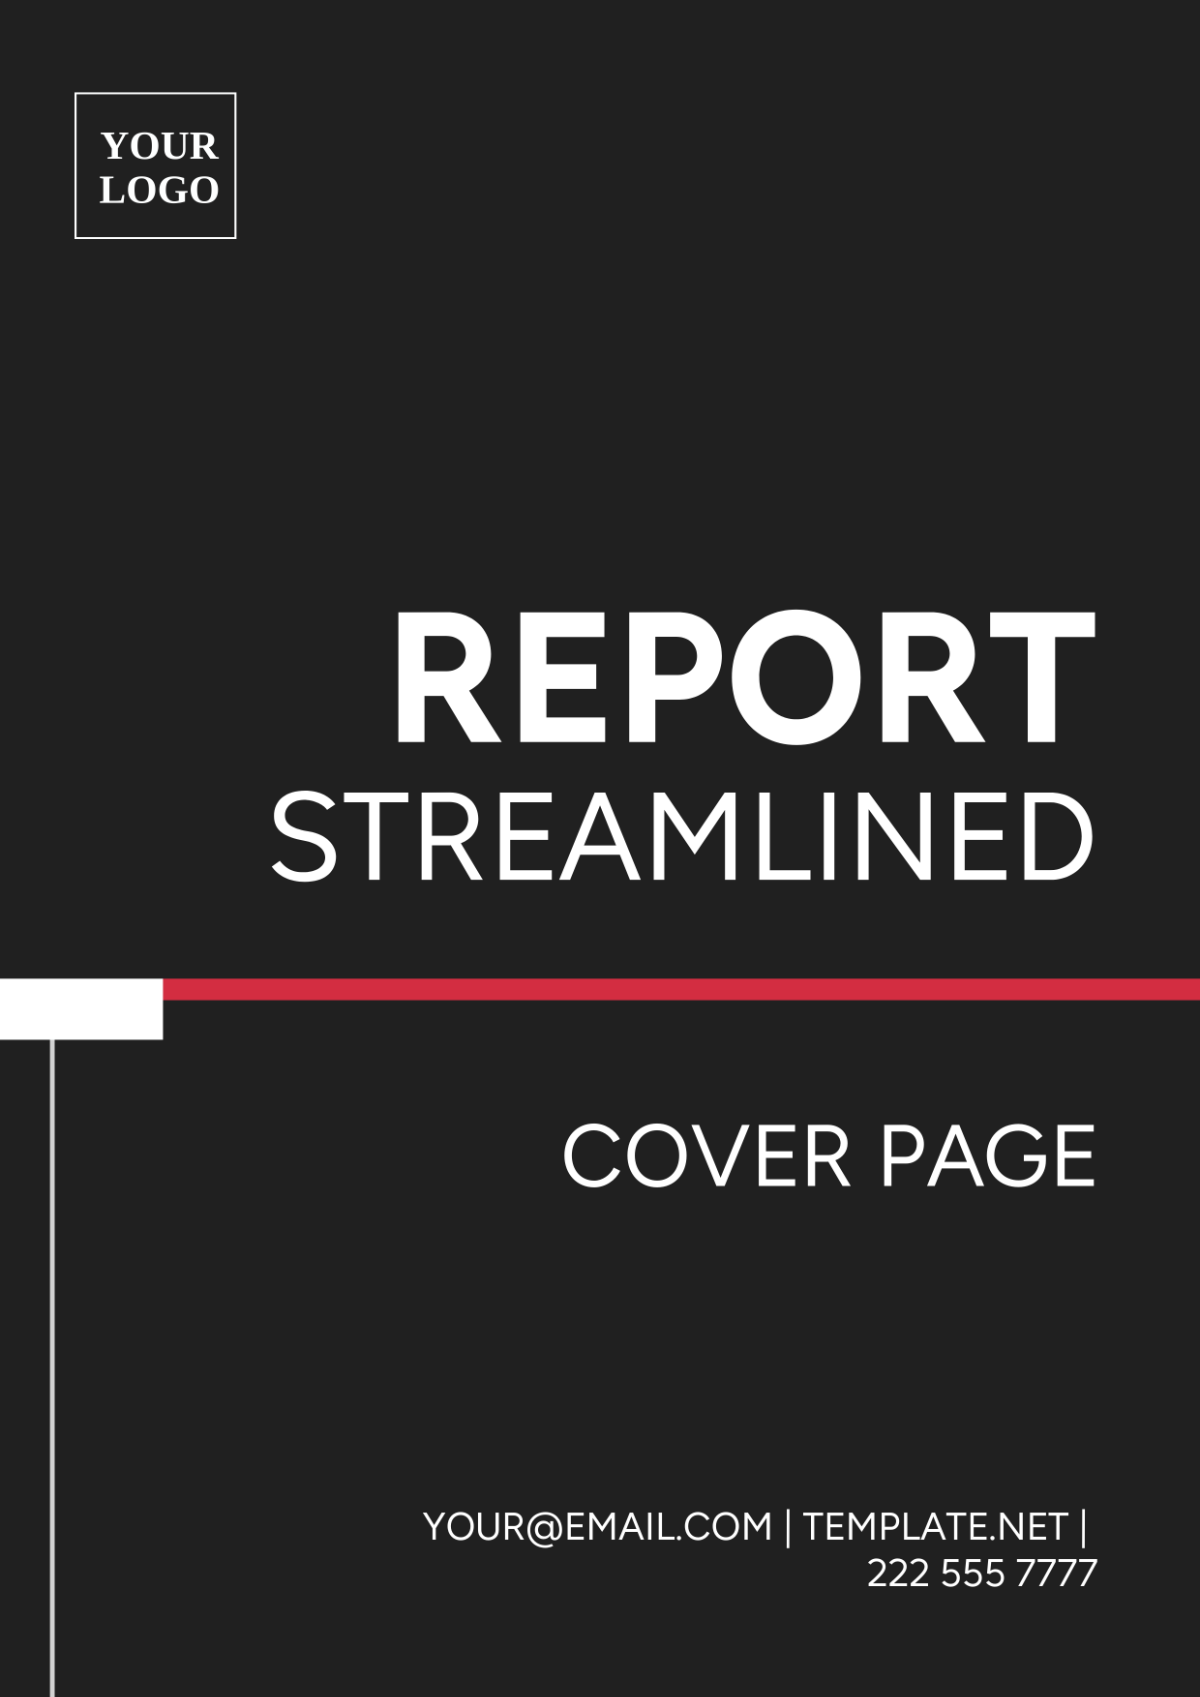 Report Streamlined Cover Page